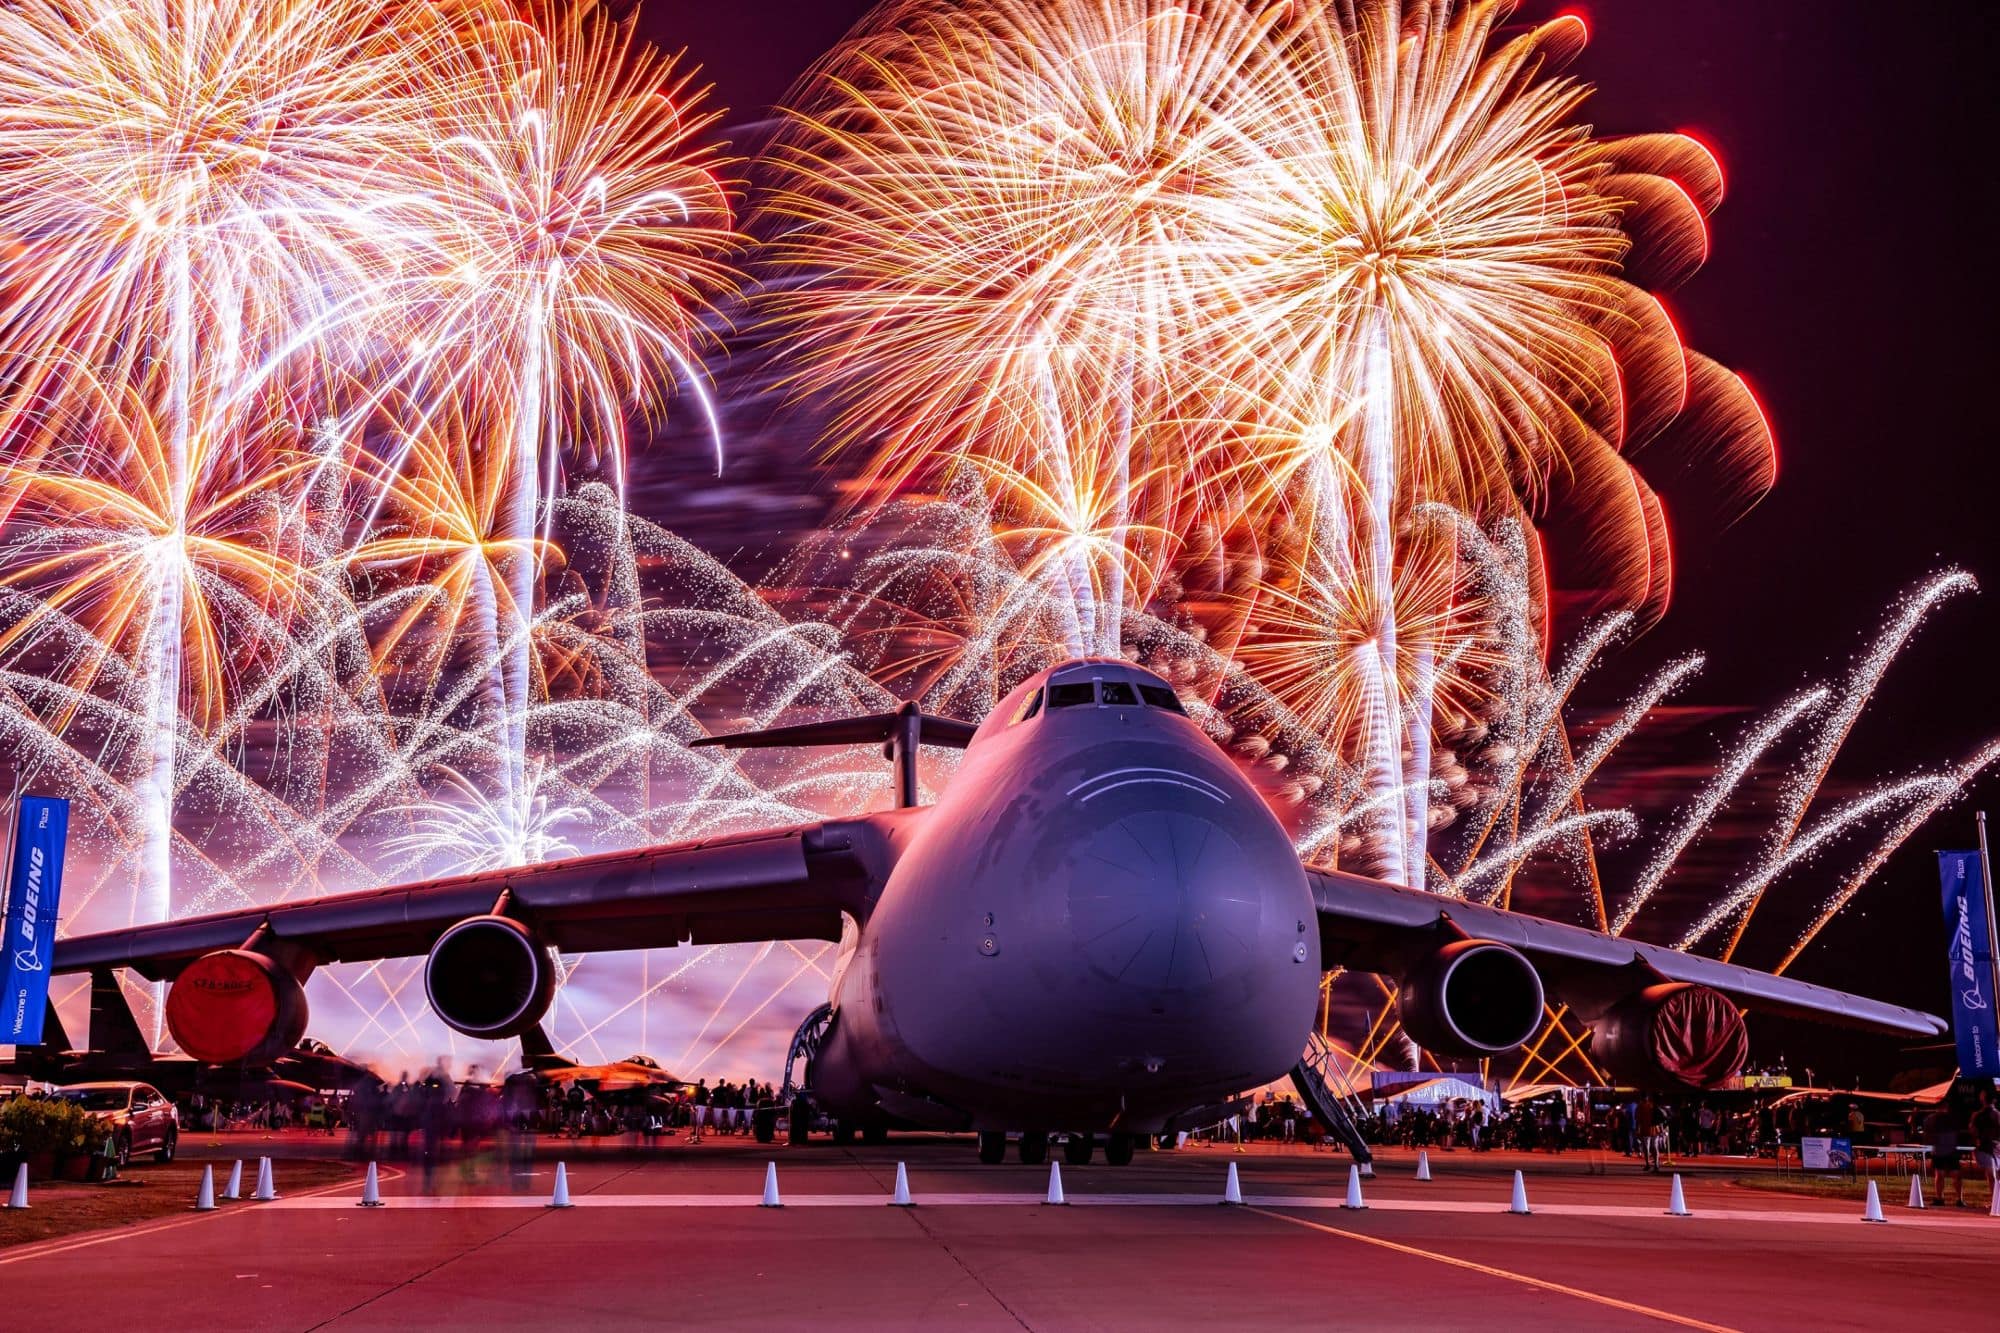 A Lockheed C-5A parked on an airport ramp with fireworks exploding behind it. (Photo: Wen Wu)